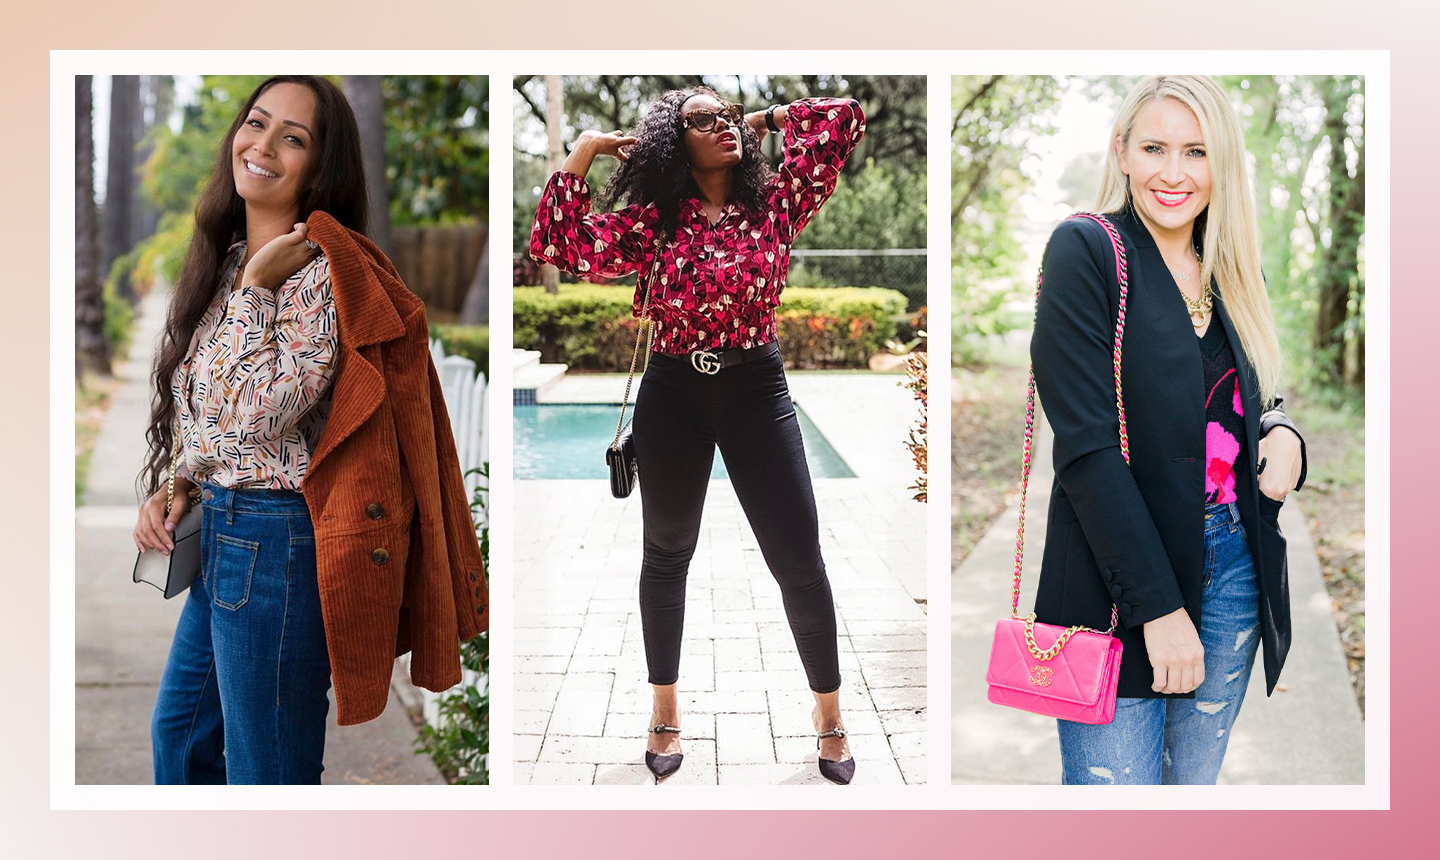 style influencers we love: the #cabisquad